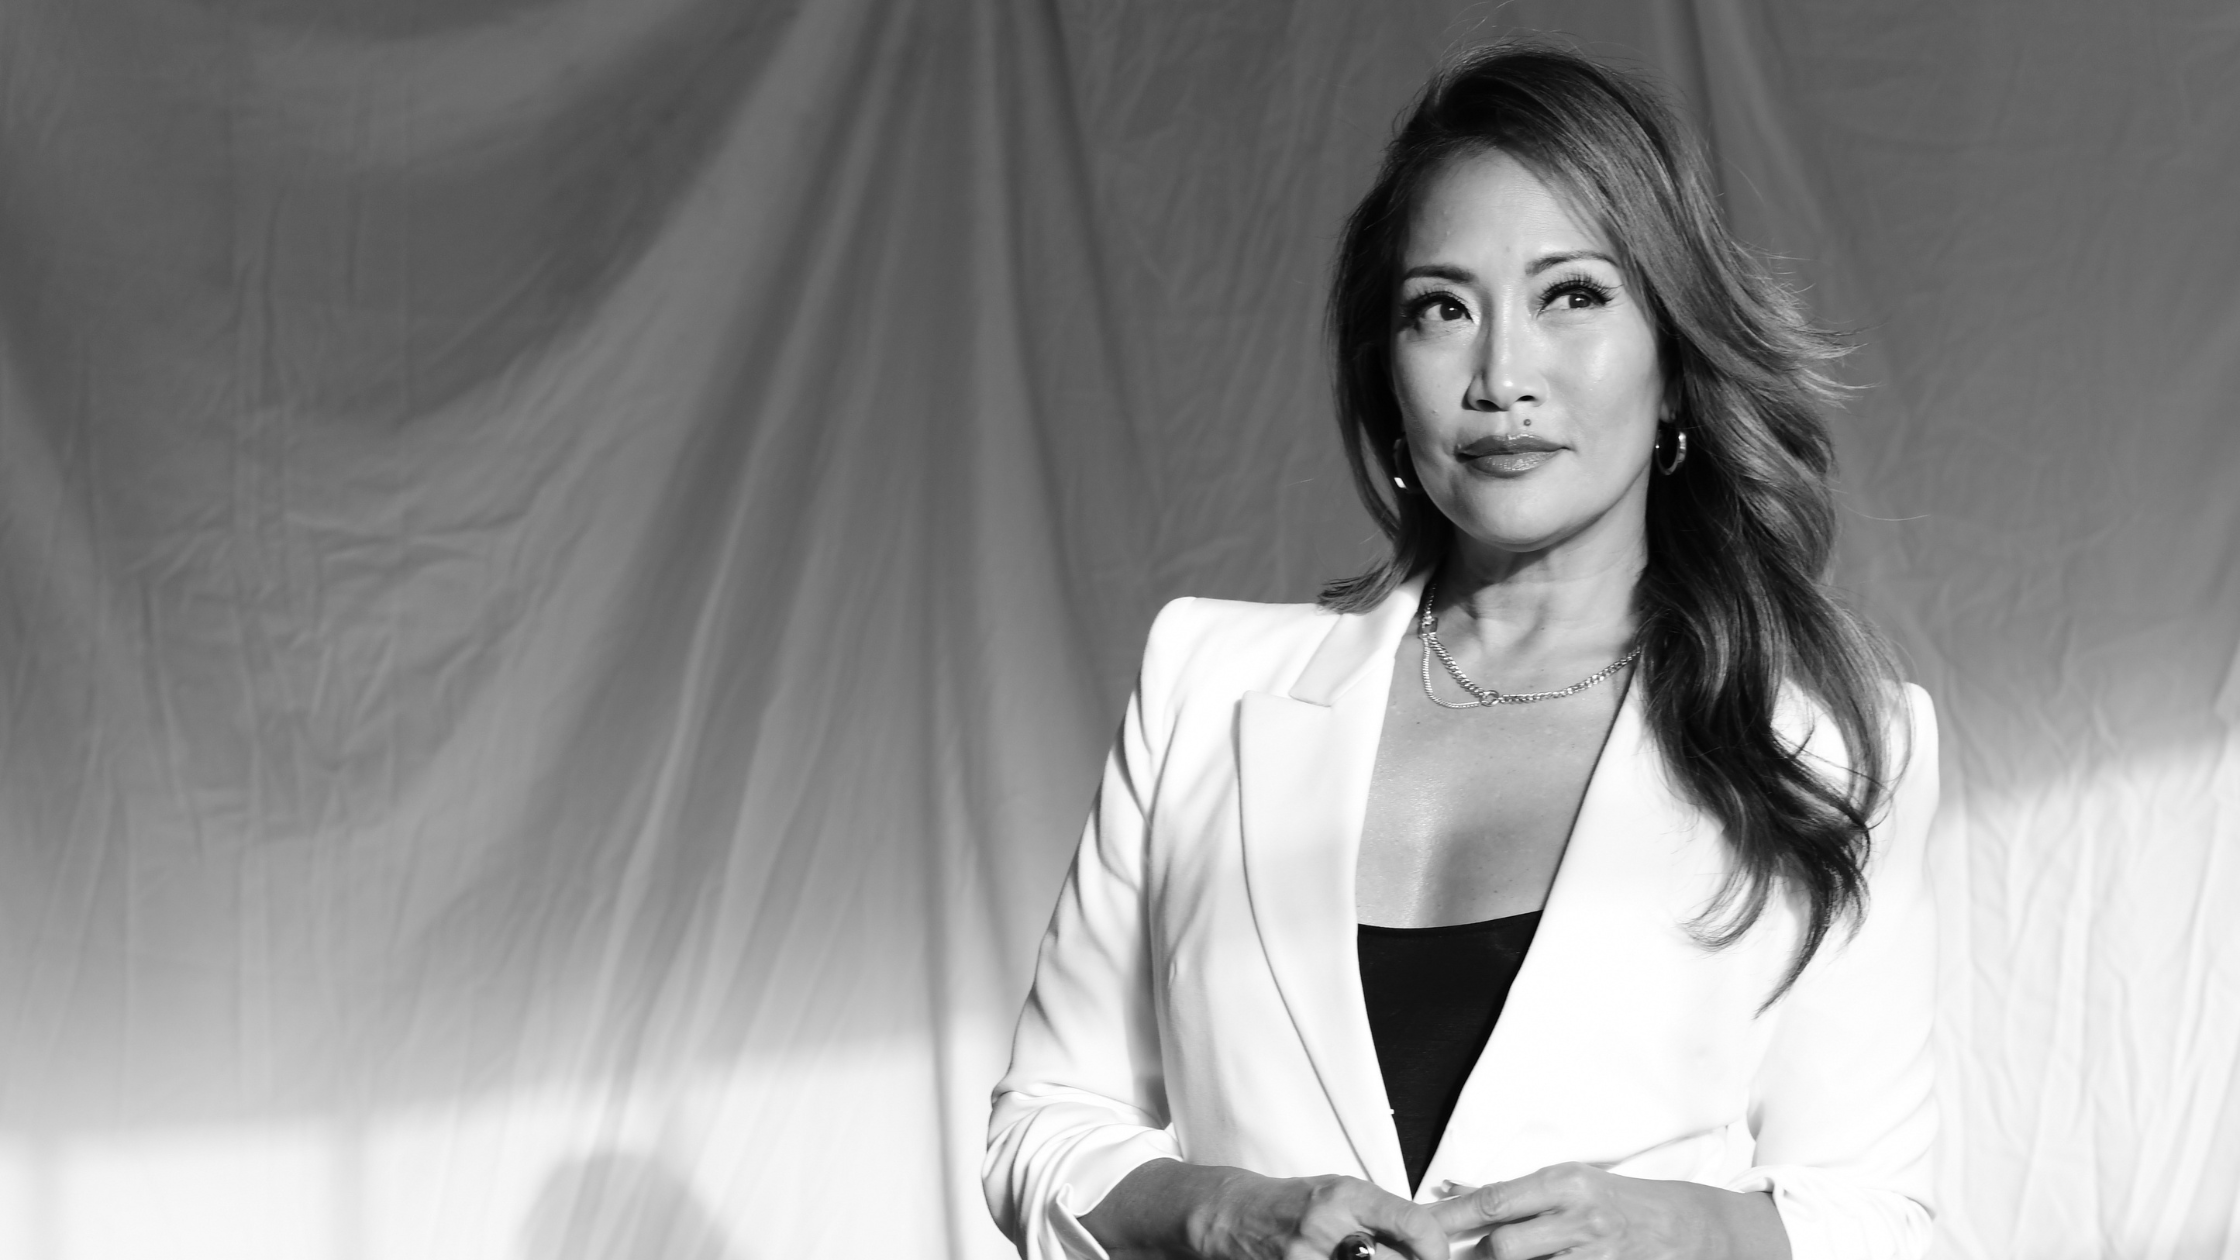 Carrie Ann Inaba  Speaking Fee, Booking Agent, & Contact Info